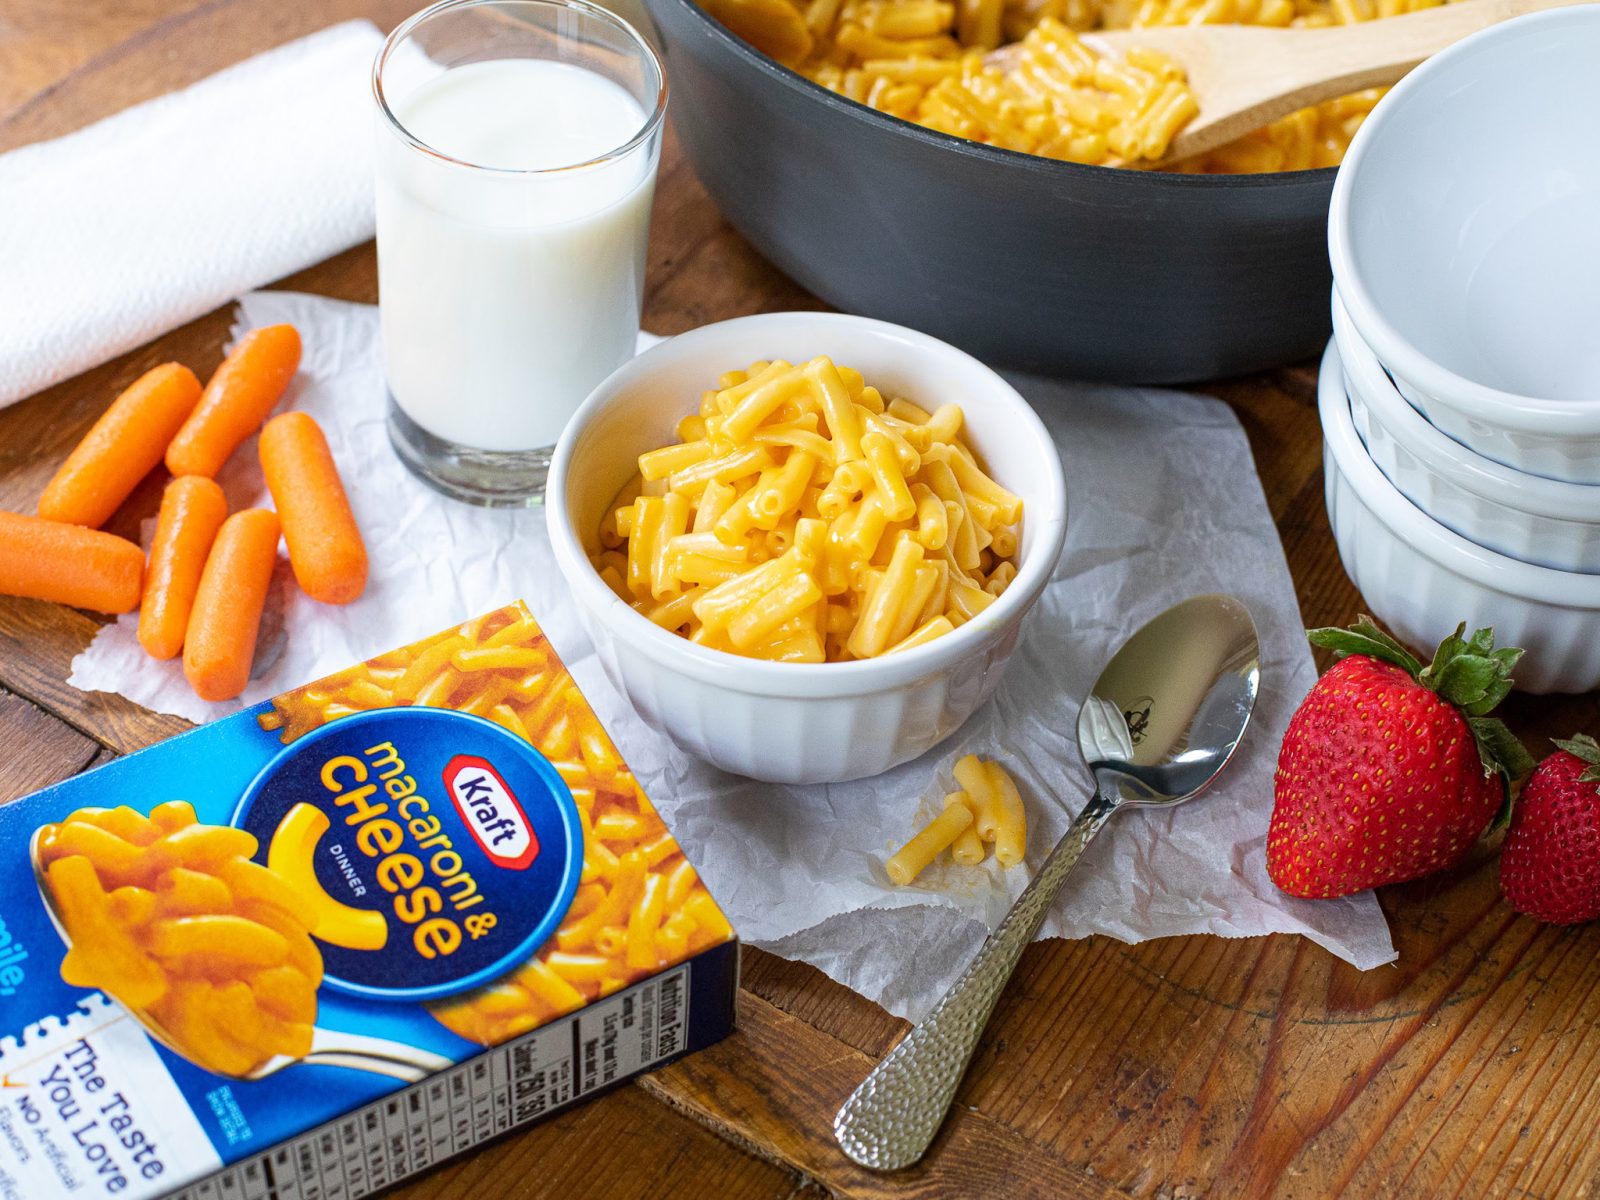 New Kraft Macaroni And Cheese Digital Mean The Boxes Are As Low As 48¢ At Kroger